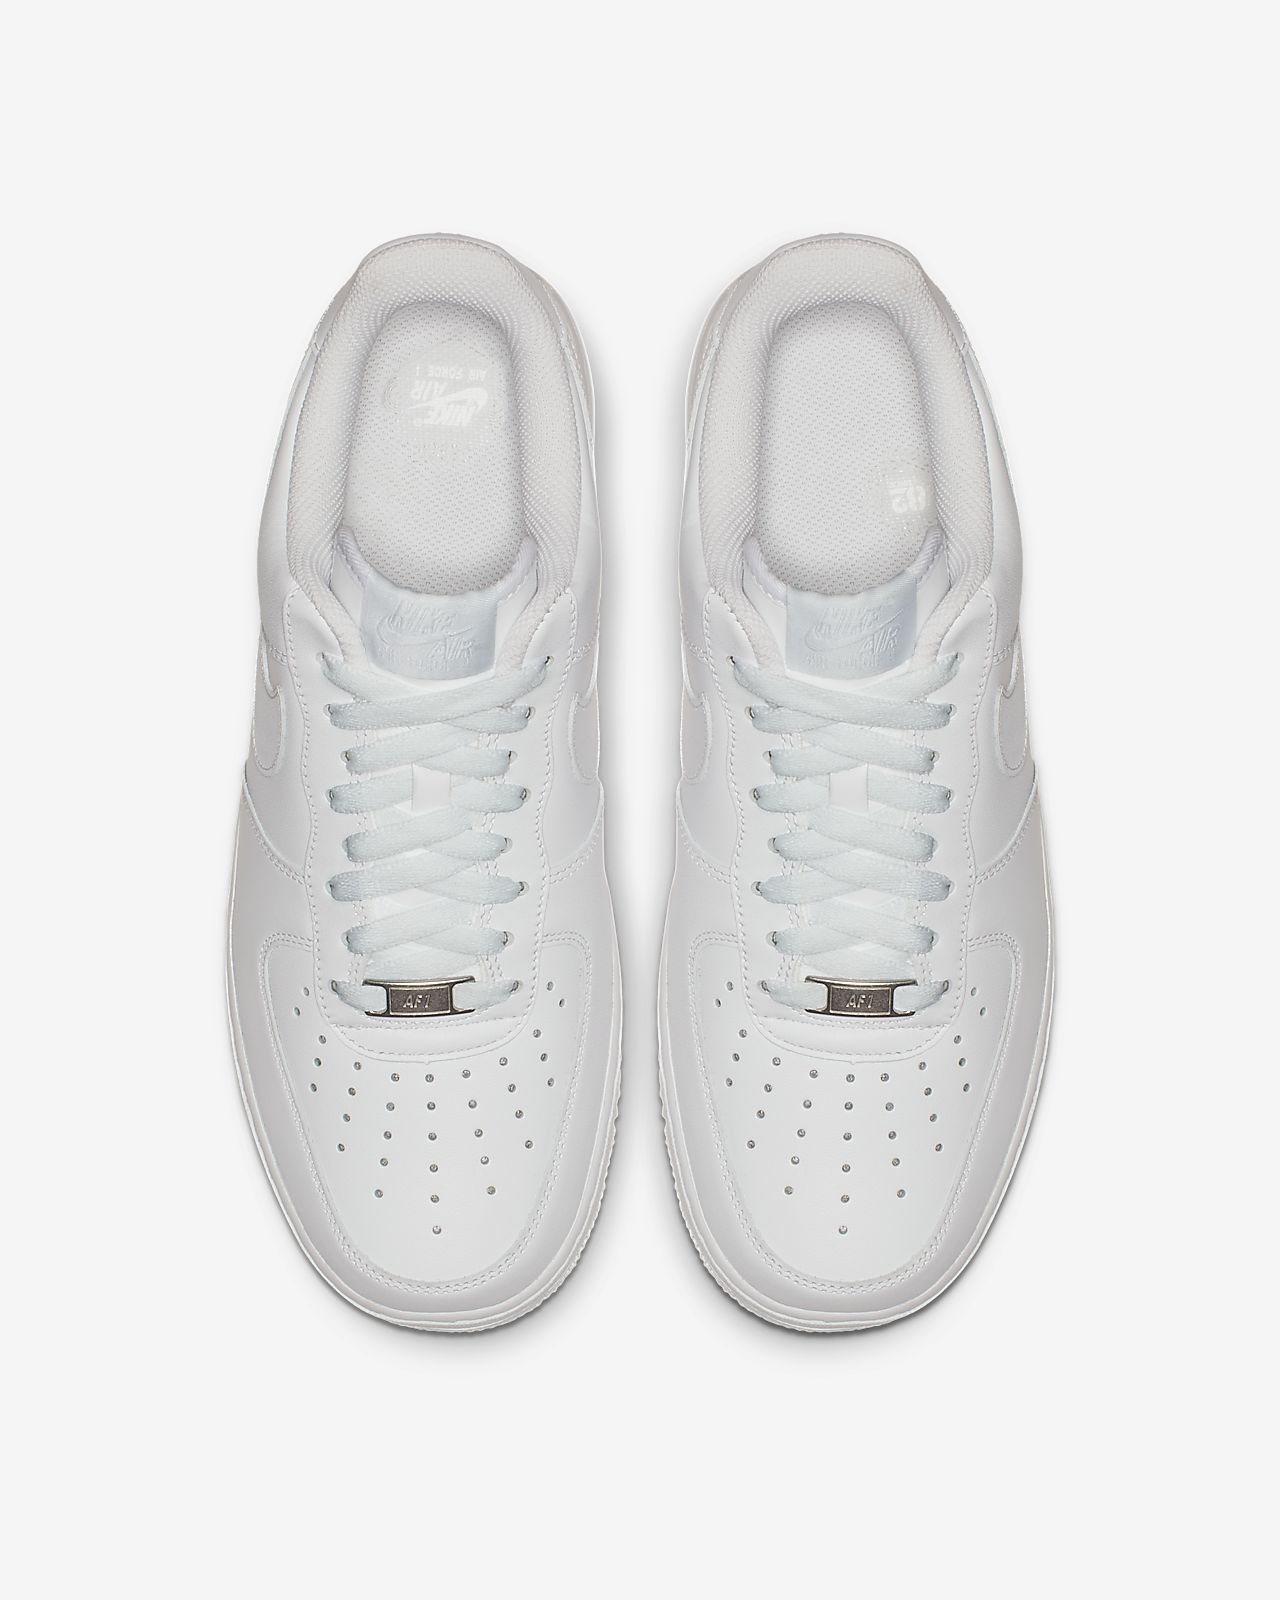 nike air force 1 07 femme blanche